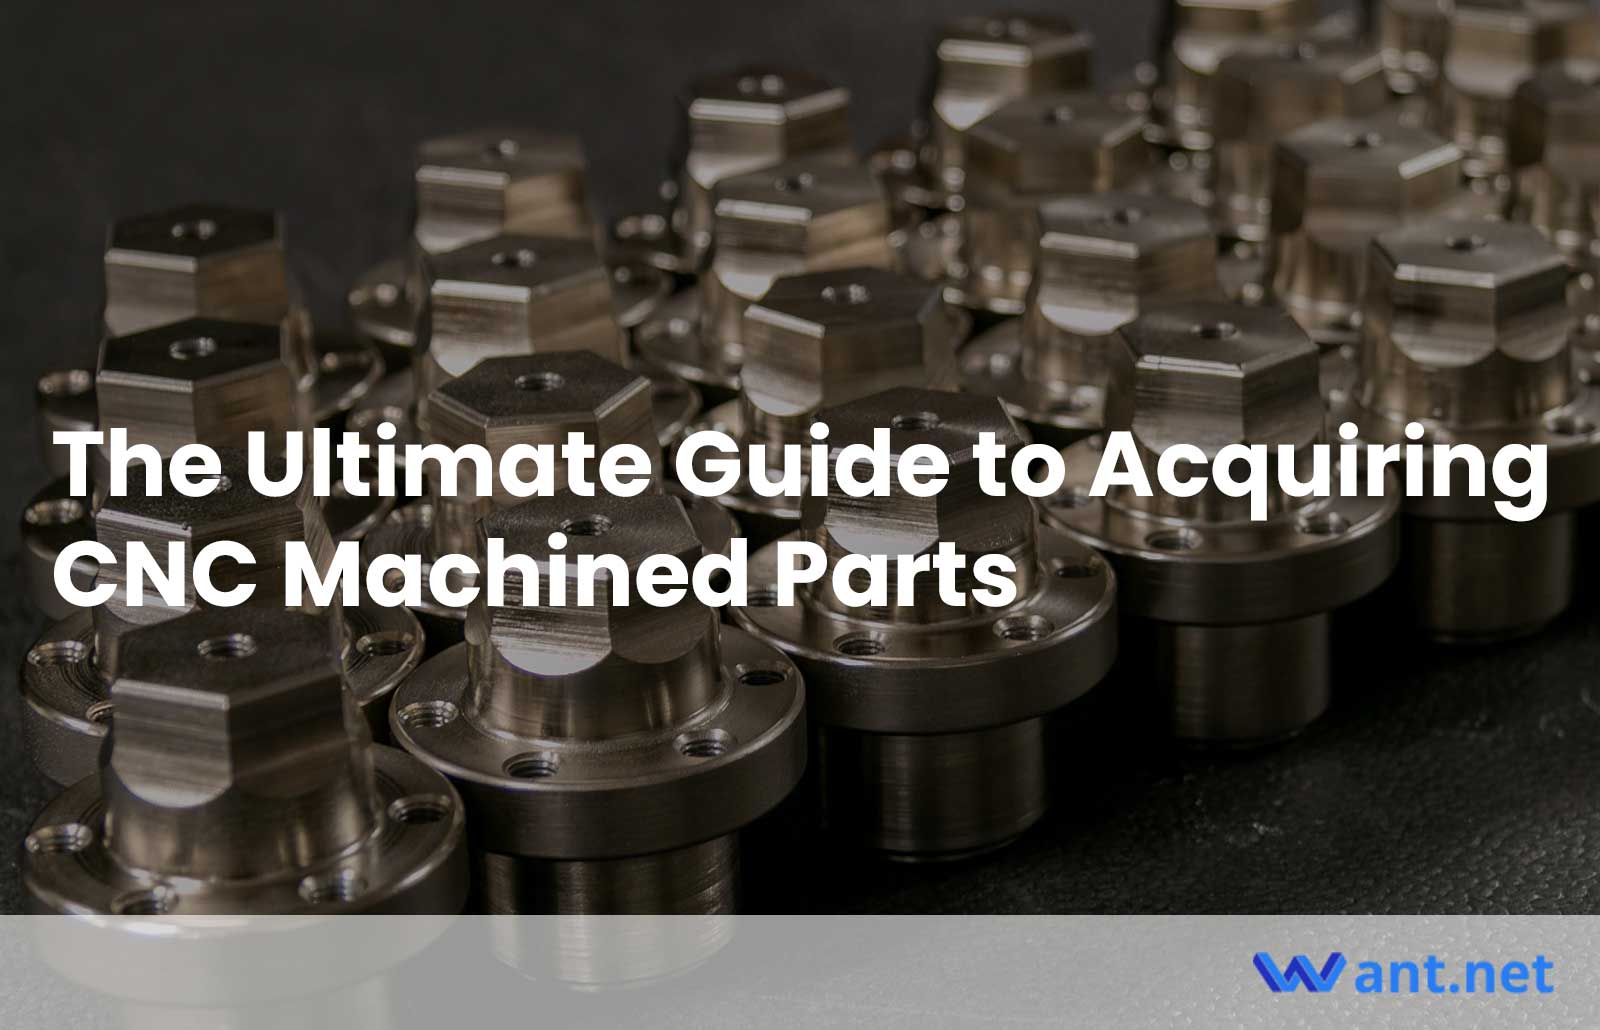 The Ultimate Guide to Acquiring CNC Machined Parts